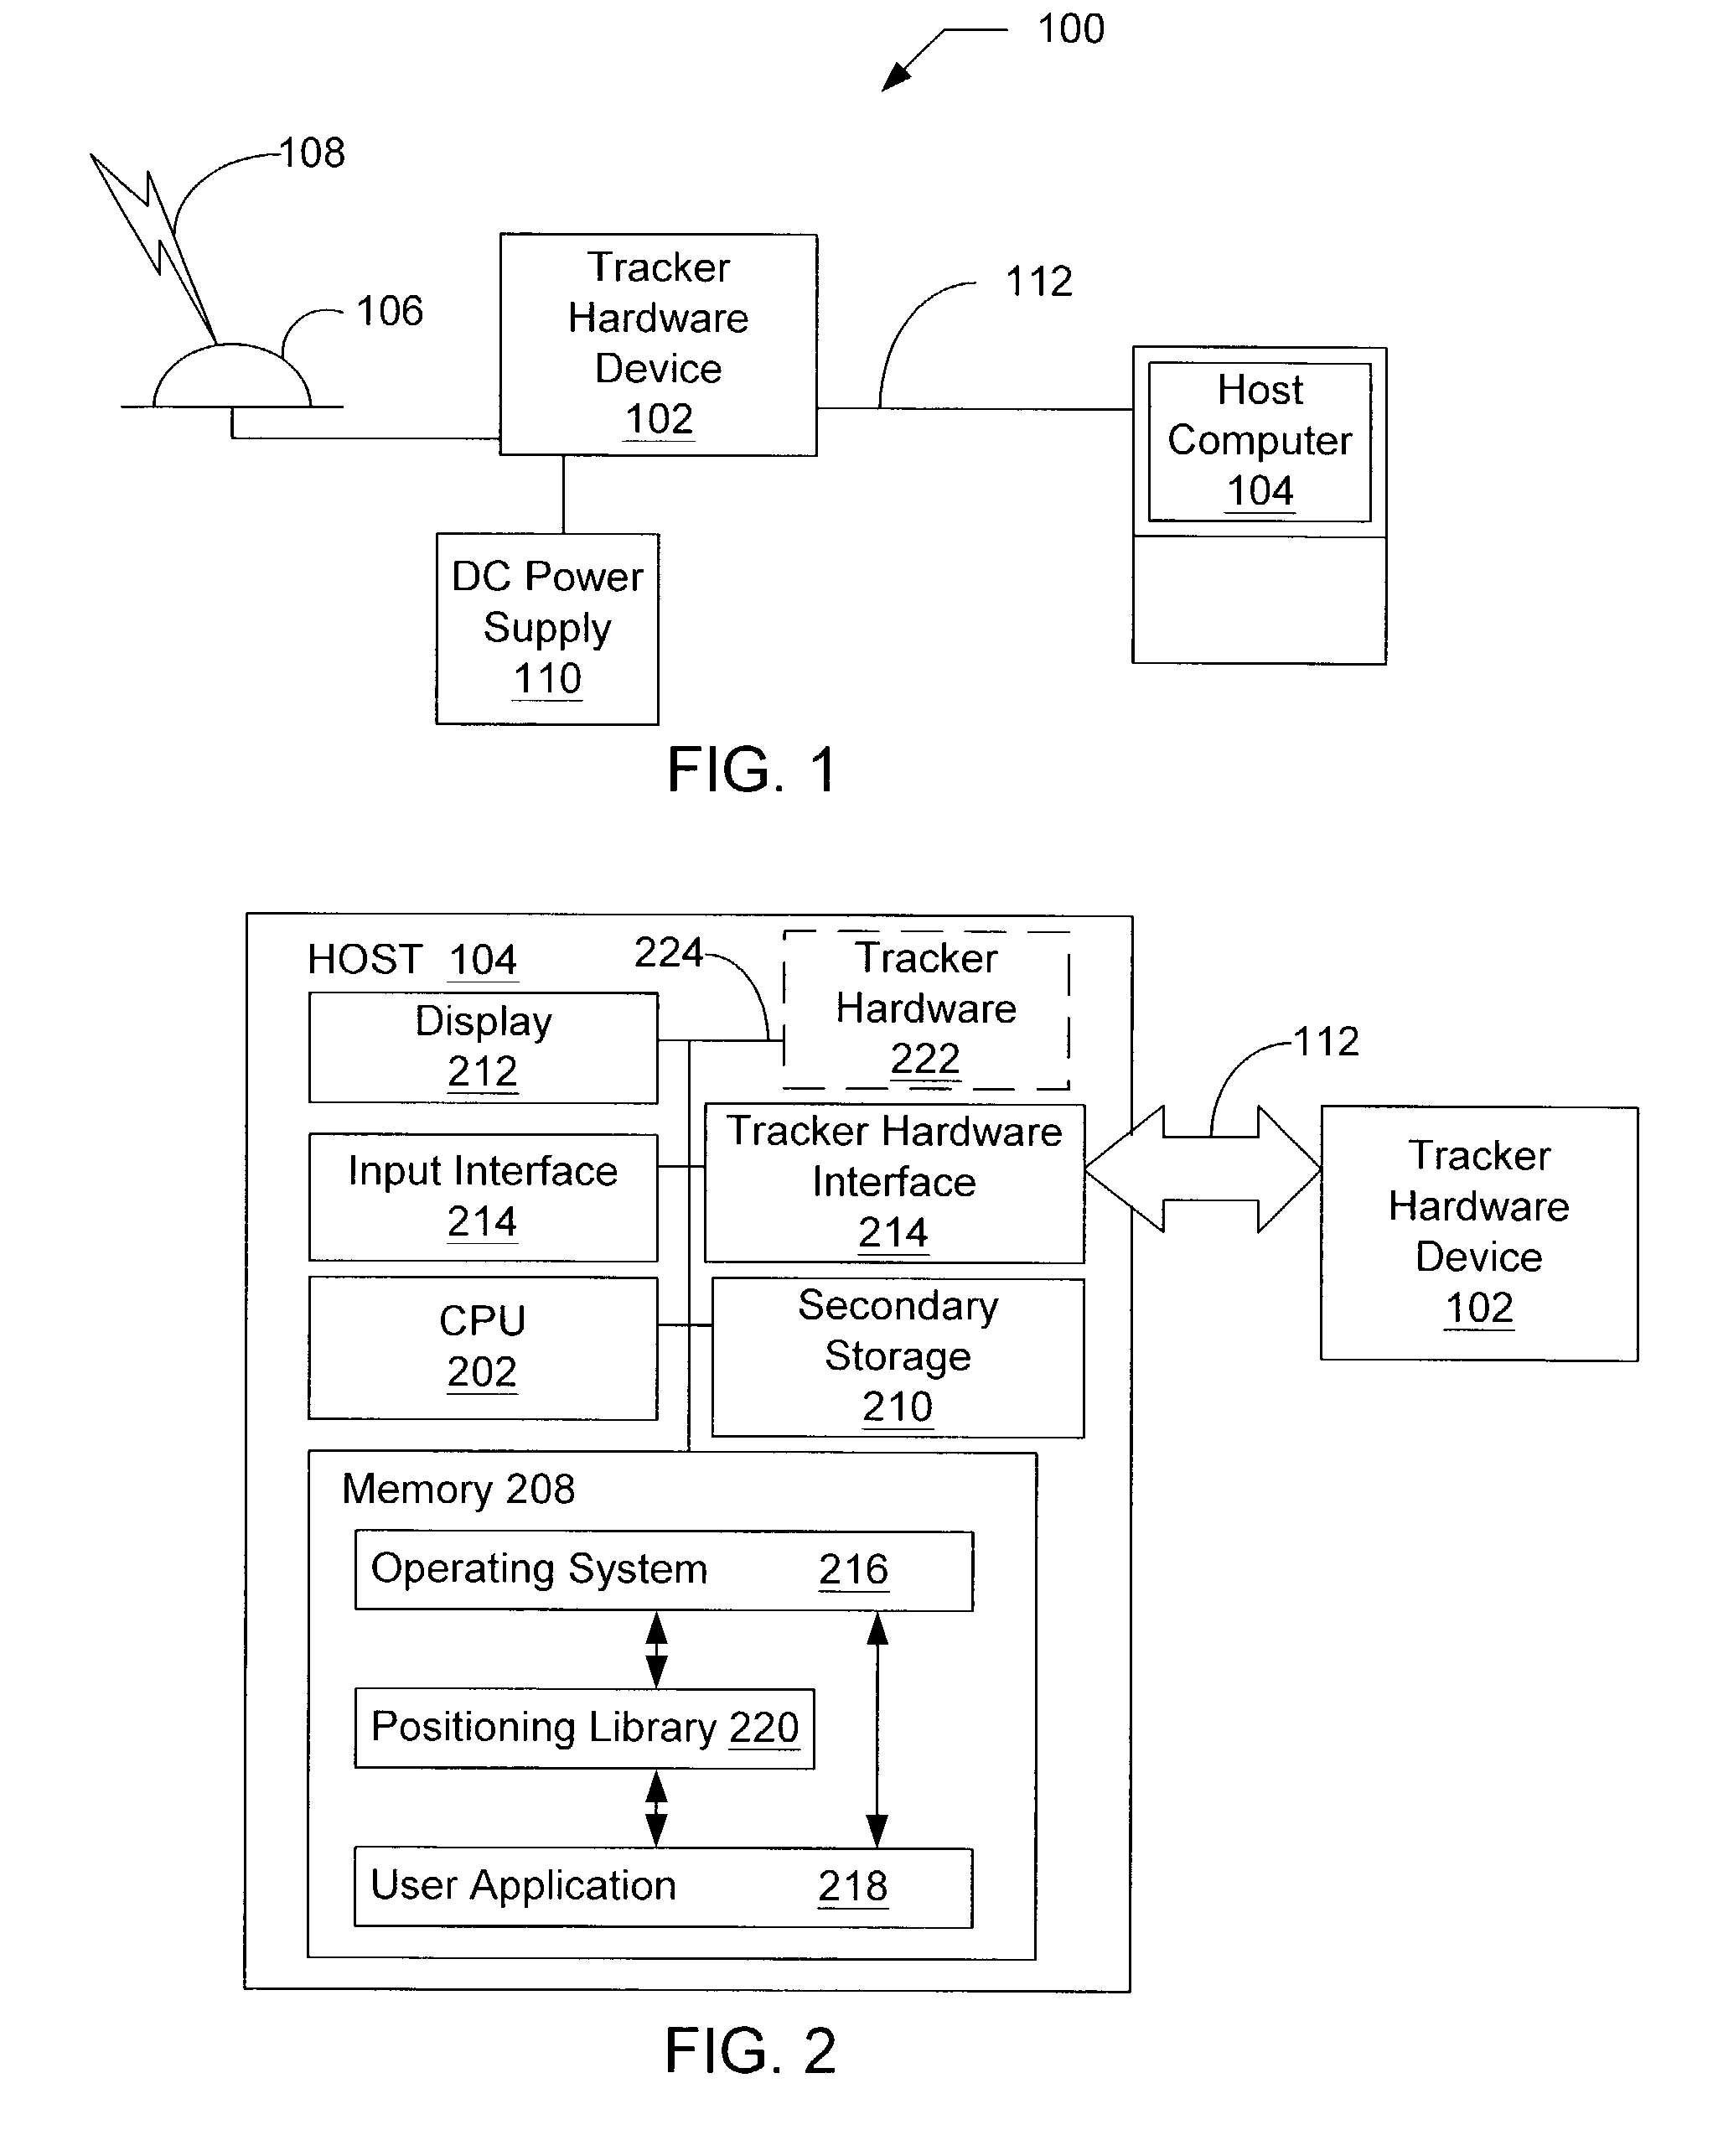 Navagation processing between a tracker hardware device and a computer host based on a satellite positioning solution system